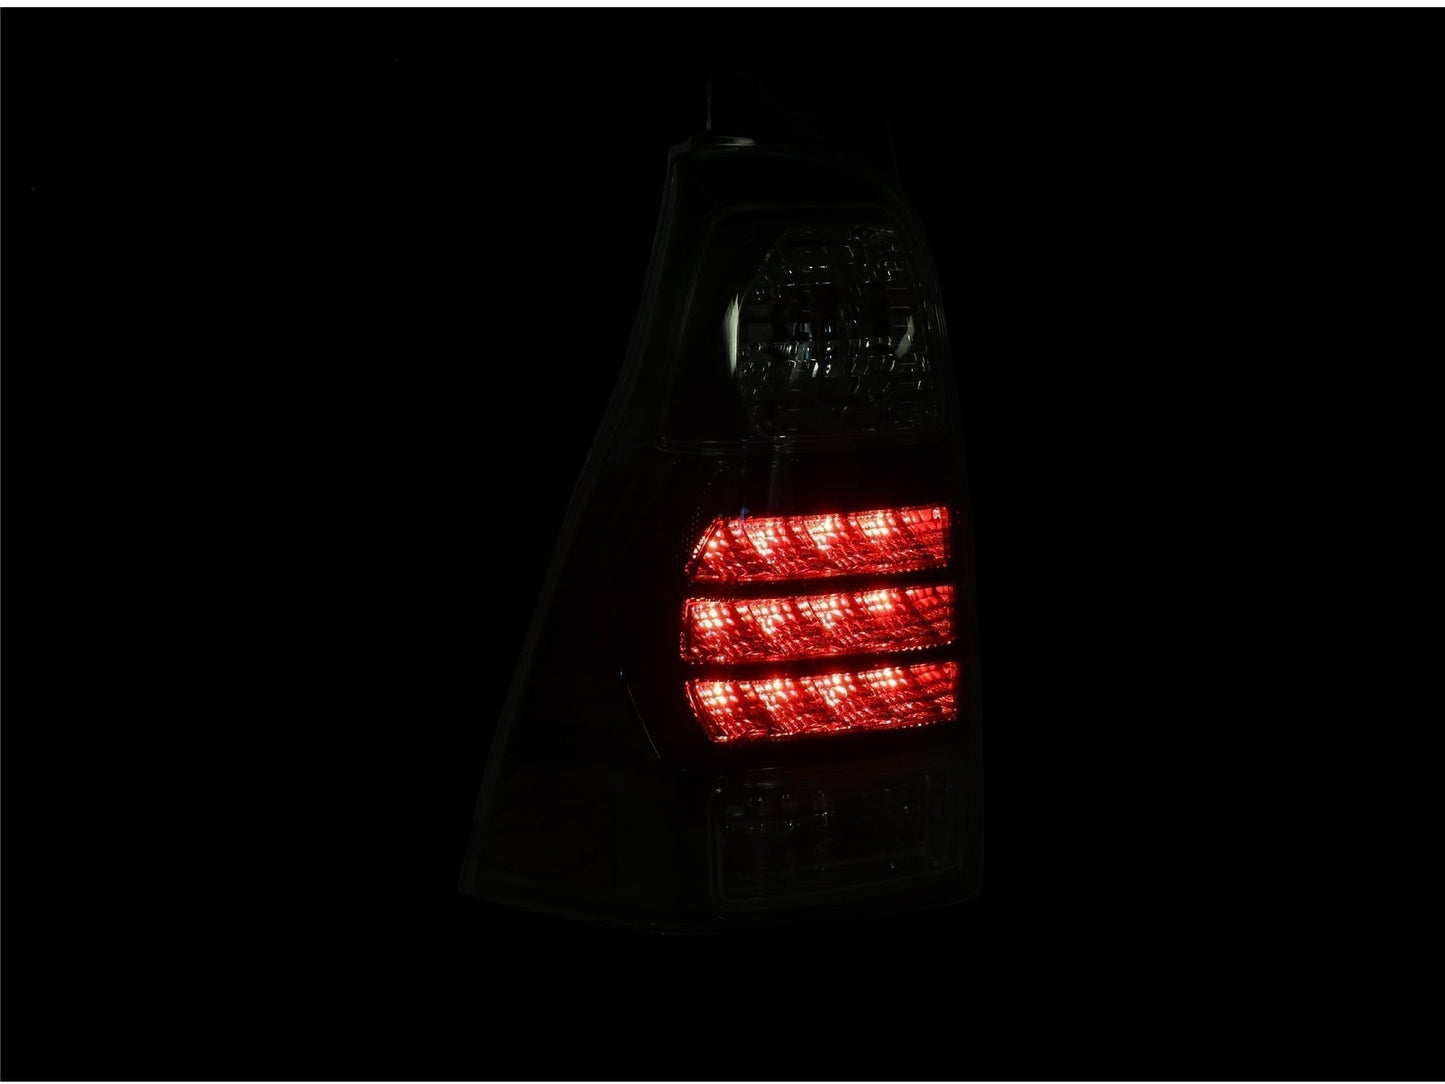 2003-2009 Toyota 4Runner TRD Black/Smoke Reflector LED Rear Tail Lights - Made by Unique Style Racing